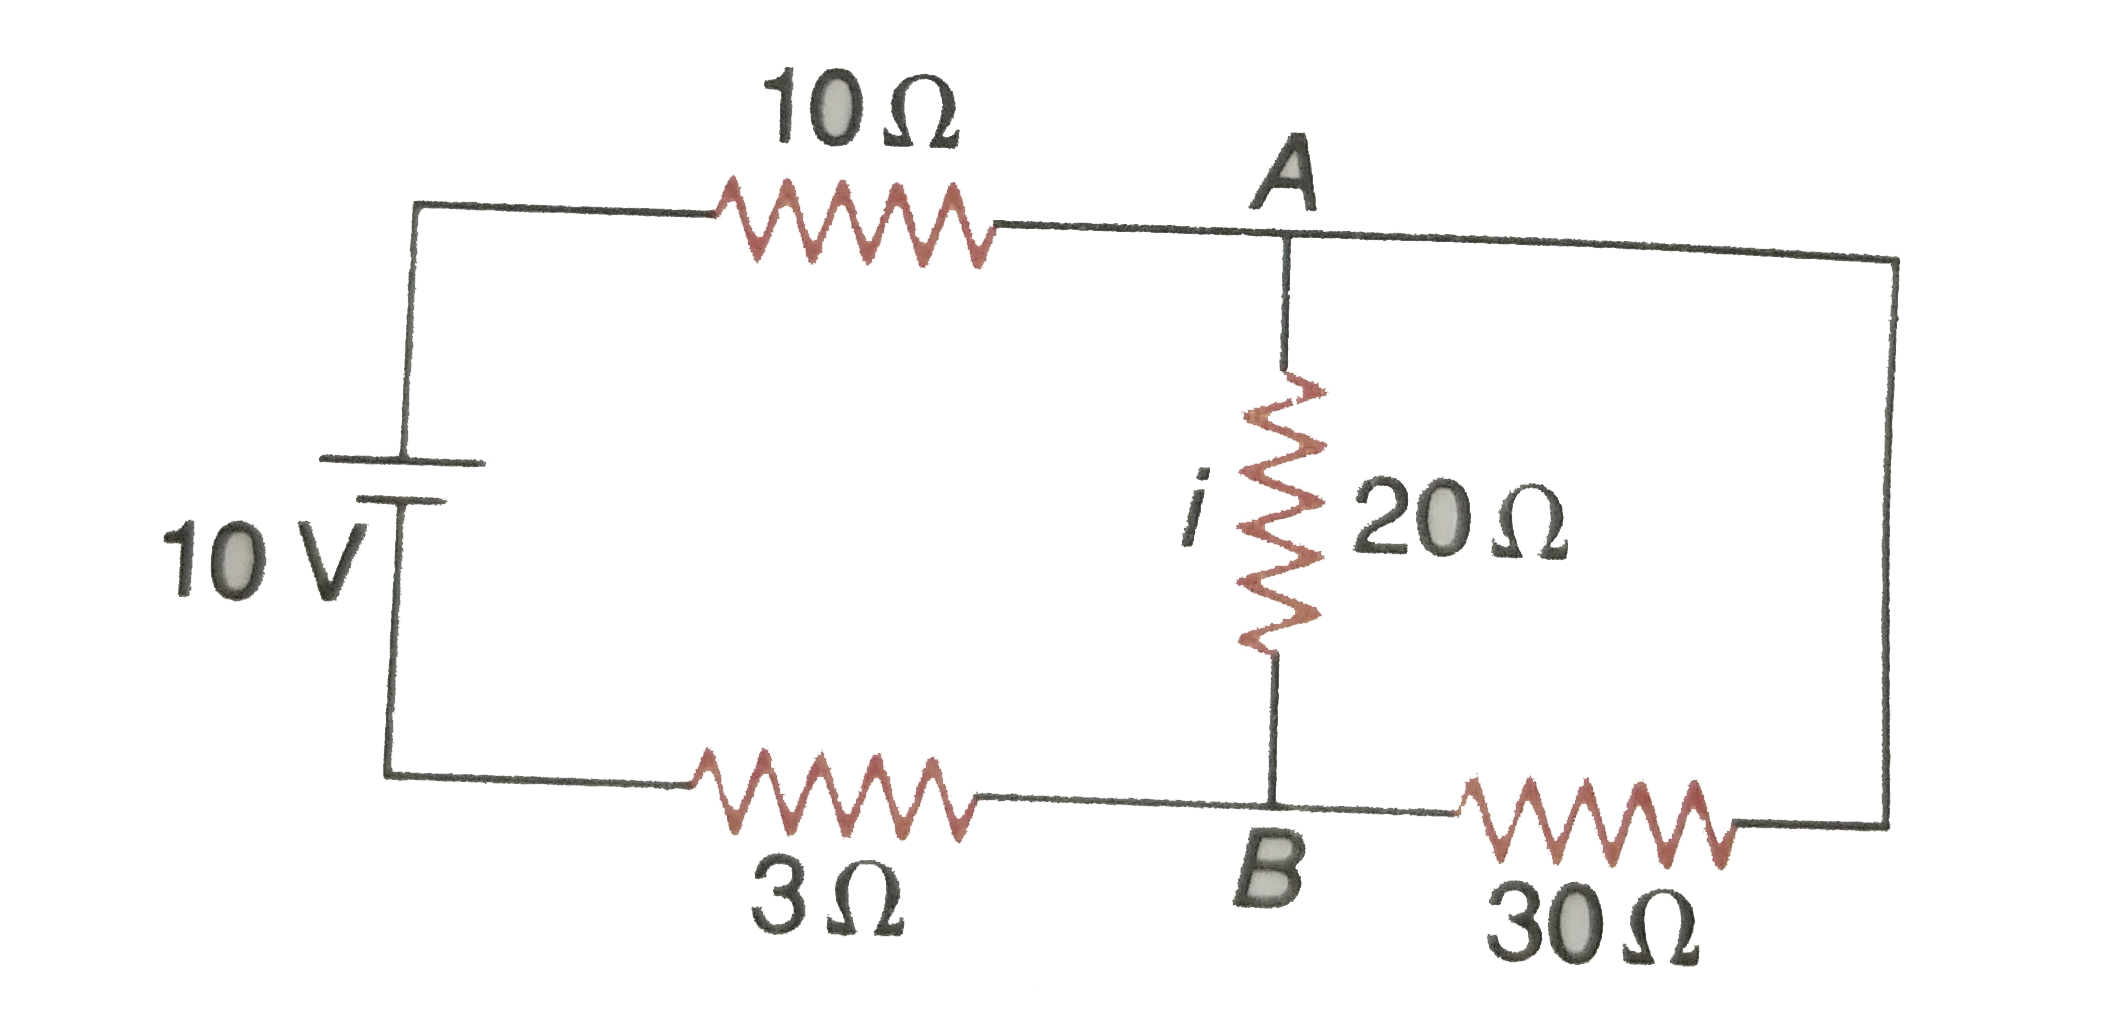 In the electrical circuit shown in the figure, the current I through the side AB is